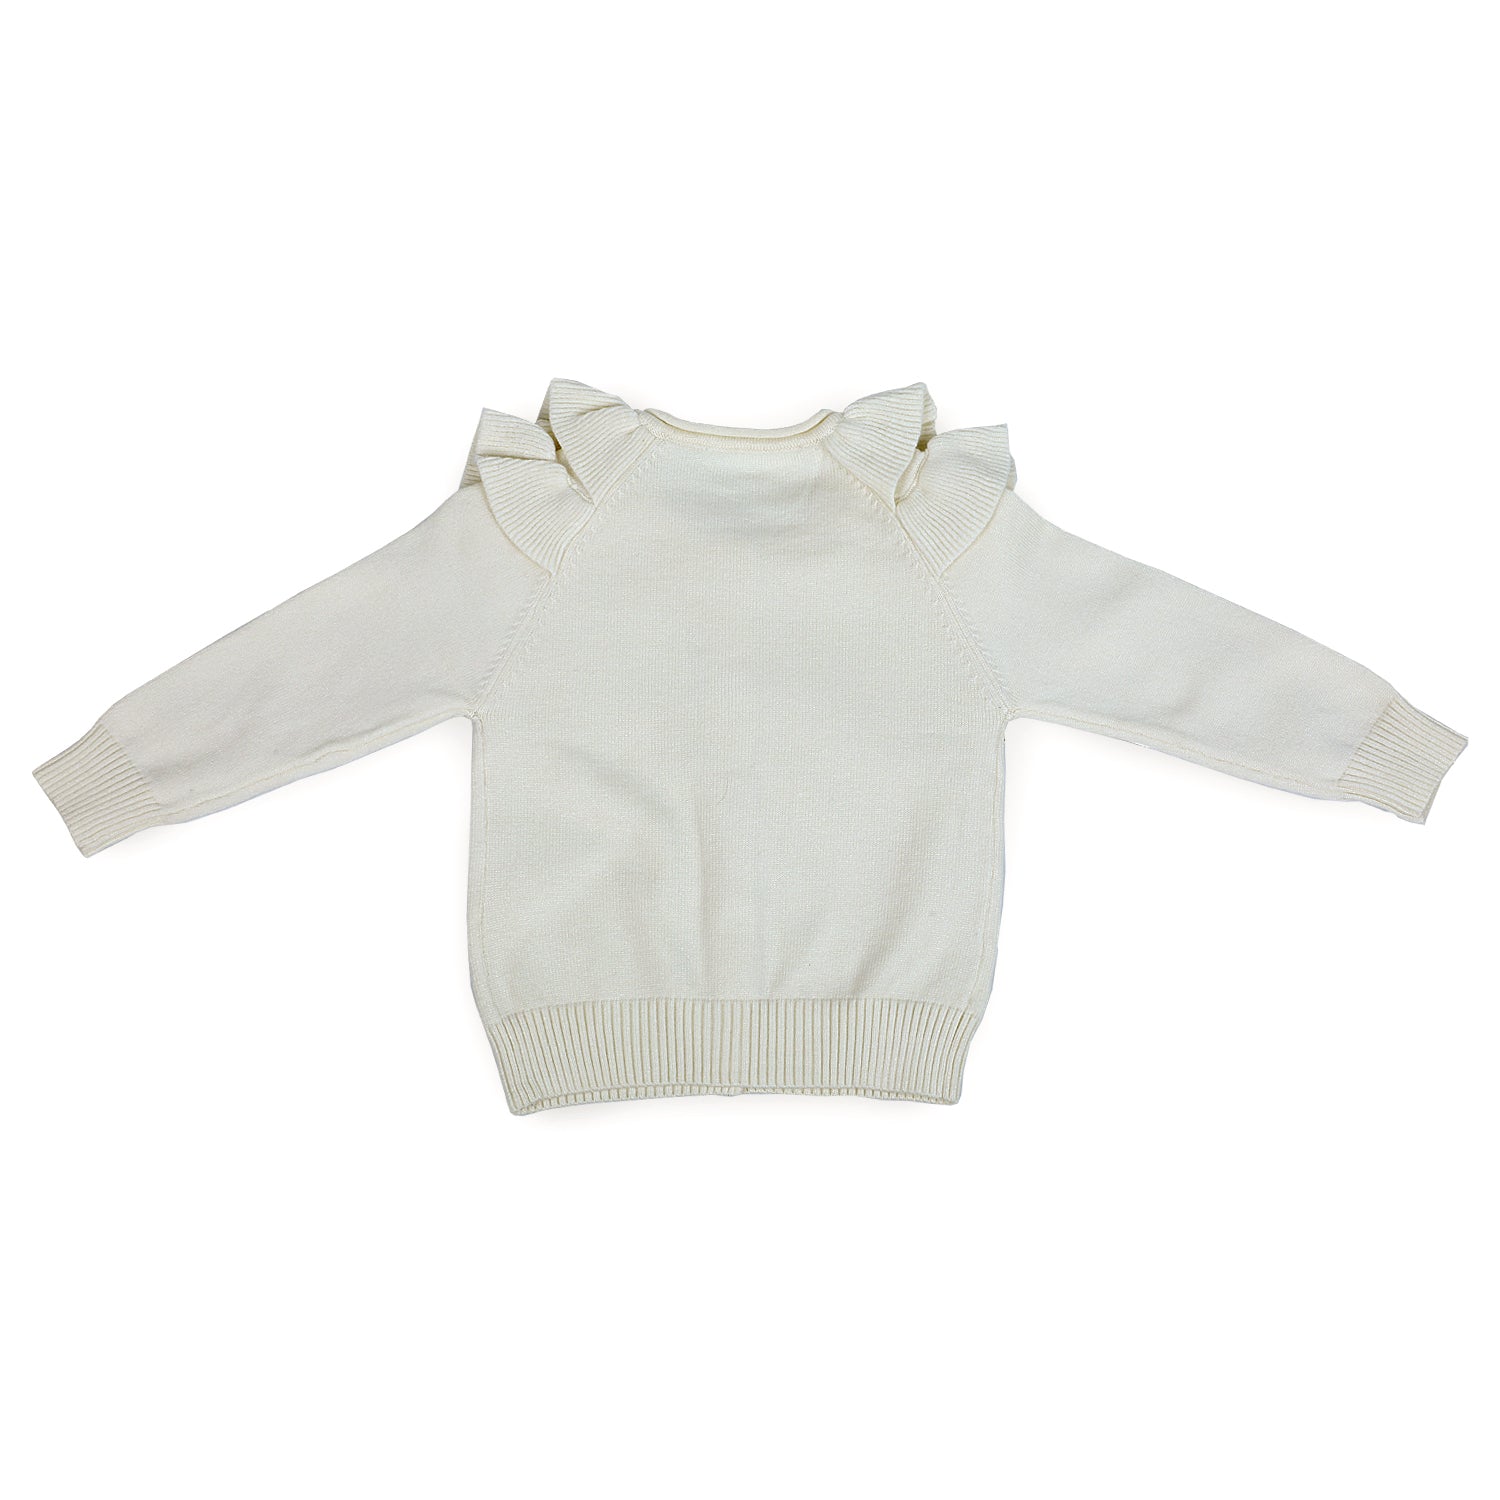 Charming Frilly Premium Full Sleeves Knitted Cardigan - Off White - Baby Moo